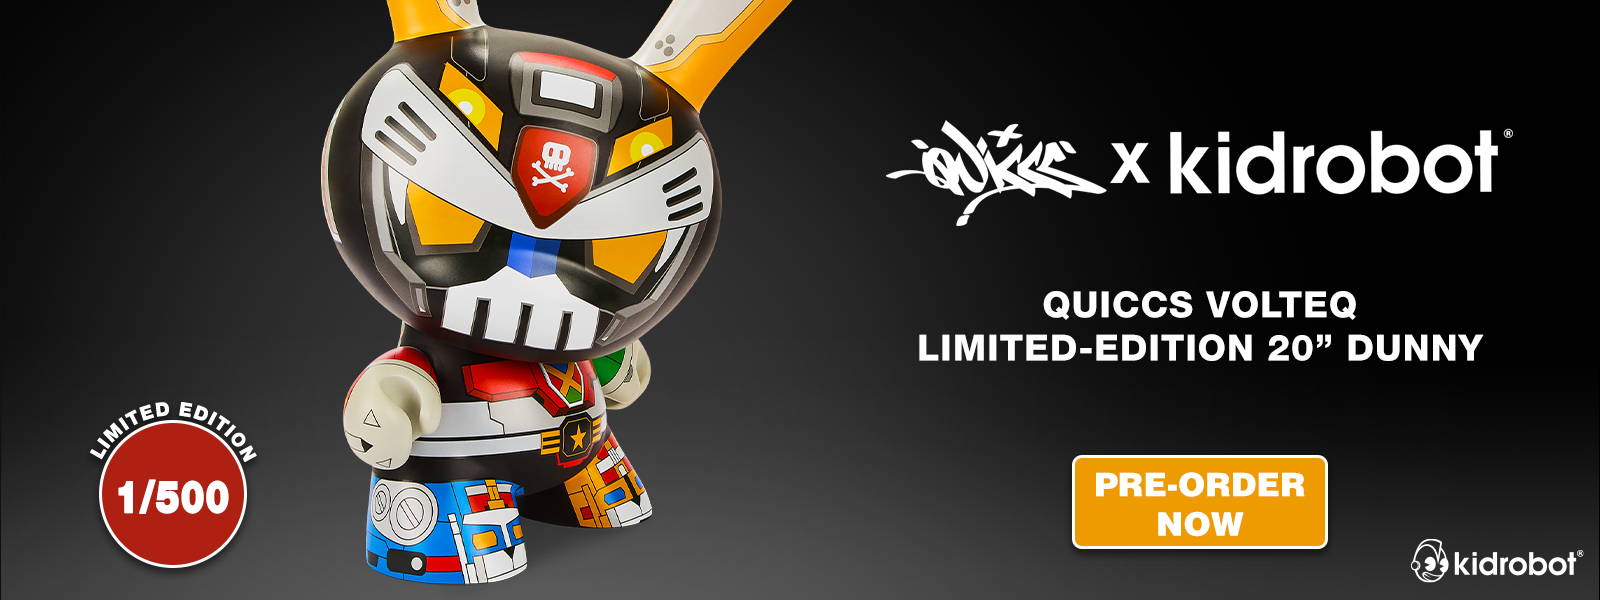 Pre-order the Limited Edition VOLTEQ 20” Dunny Vinyl Art Figure by Quiccs